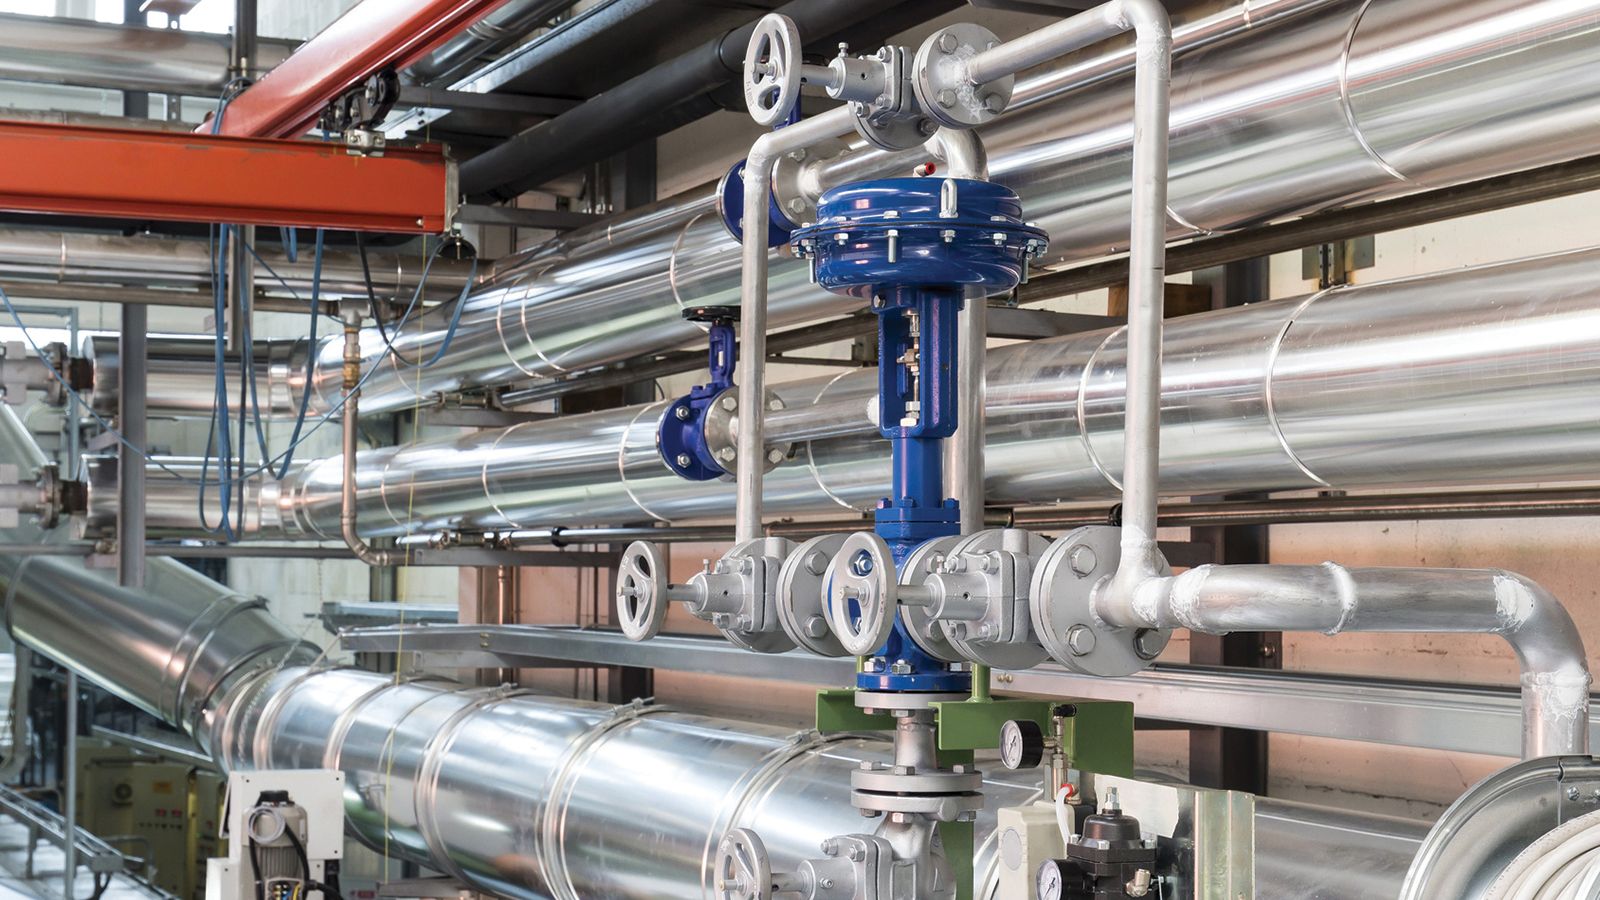 Ship Machinery and Piping Systems